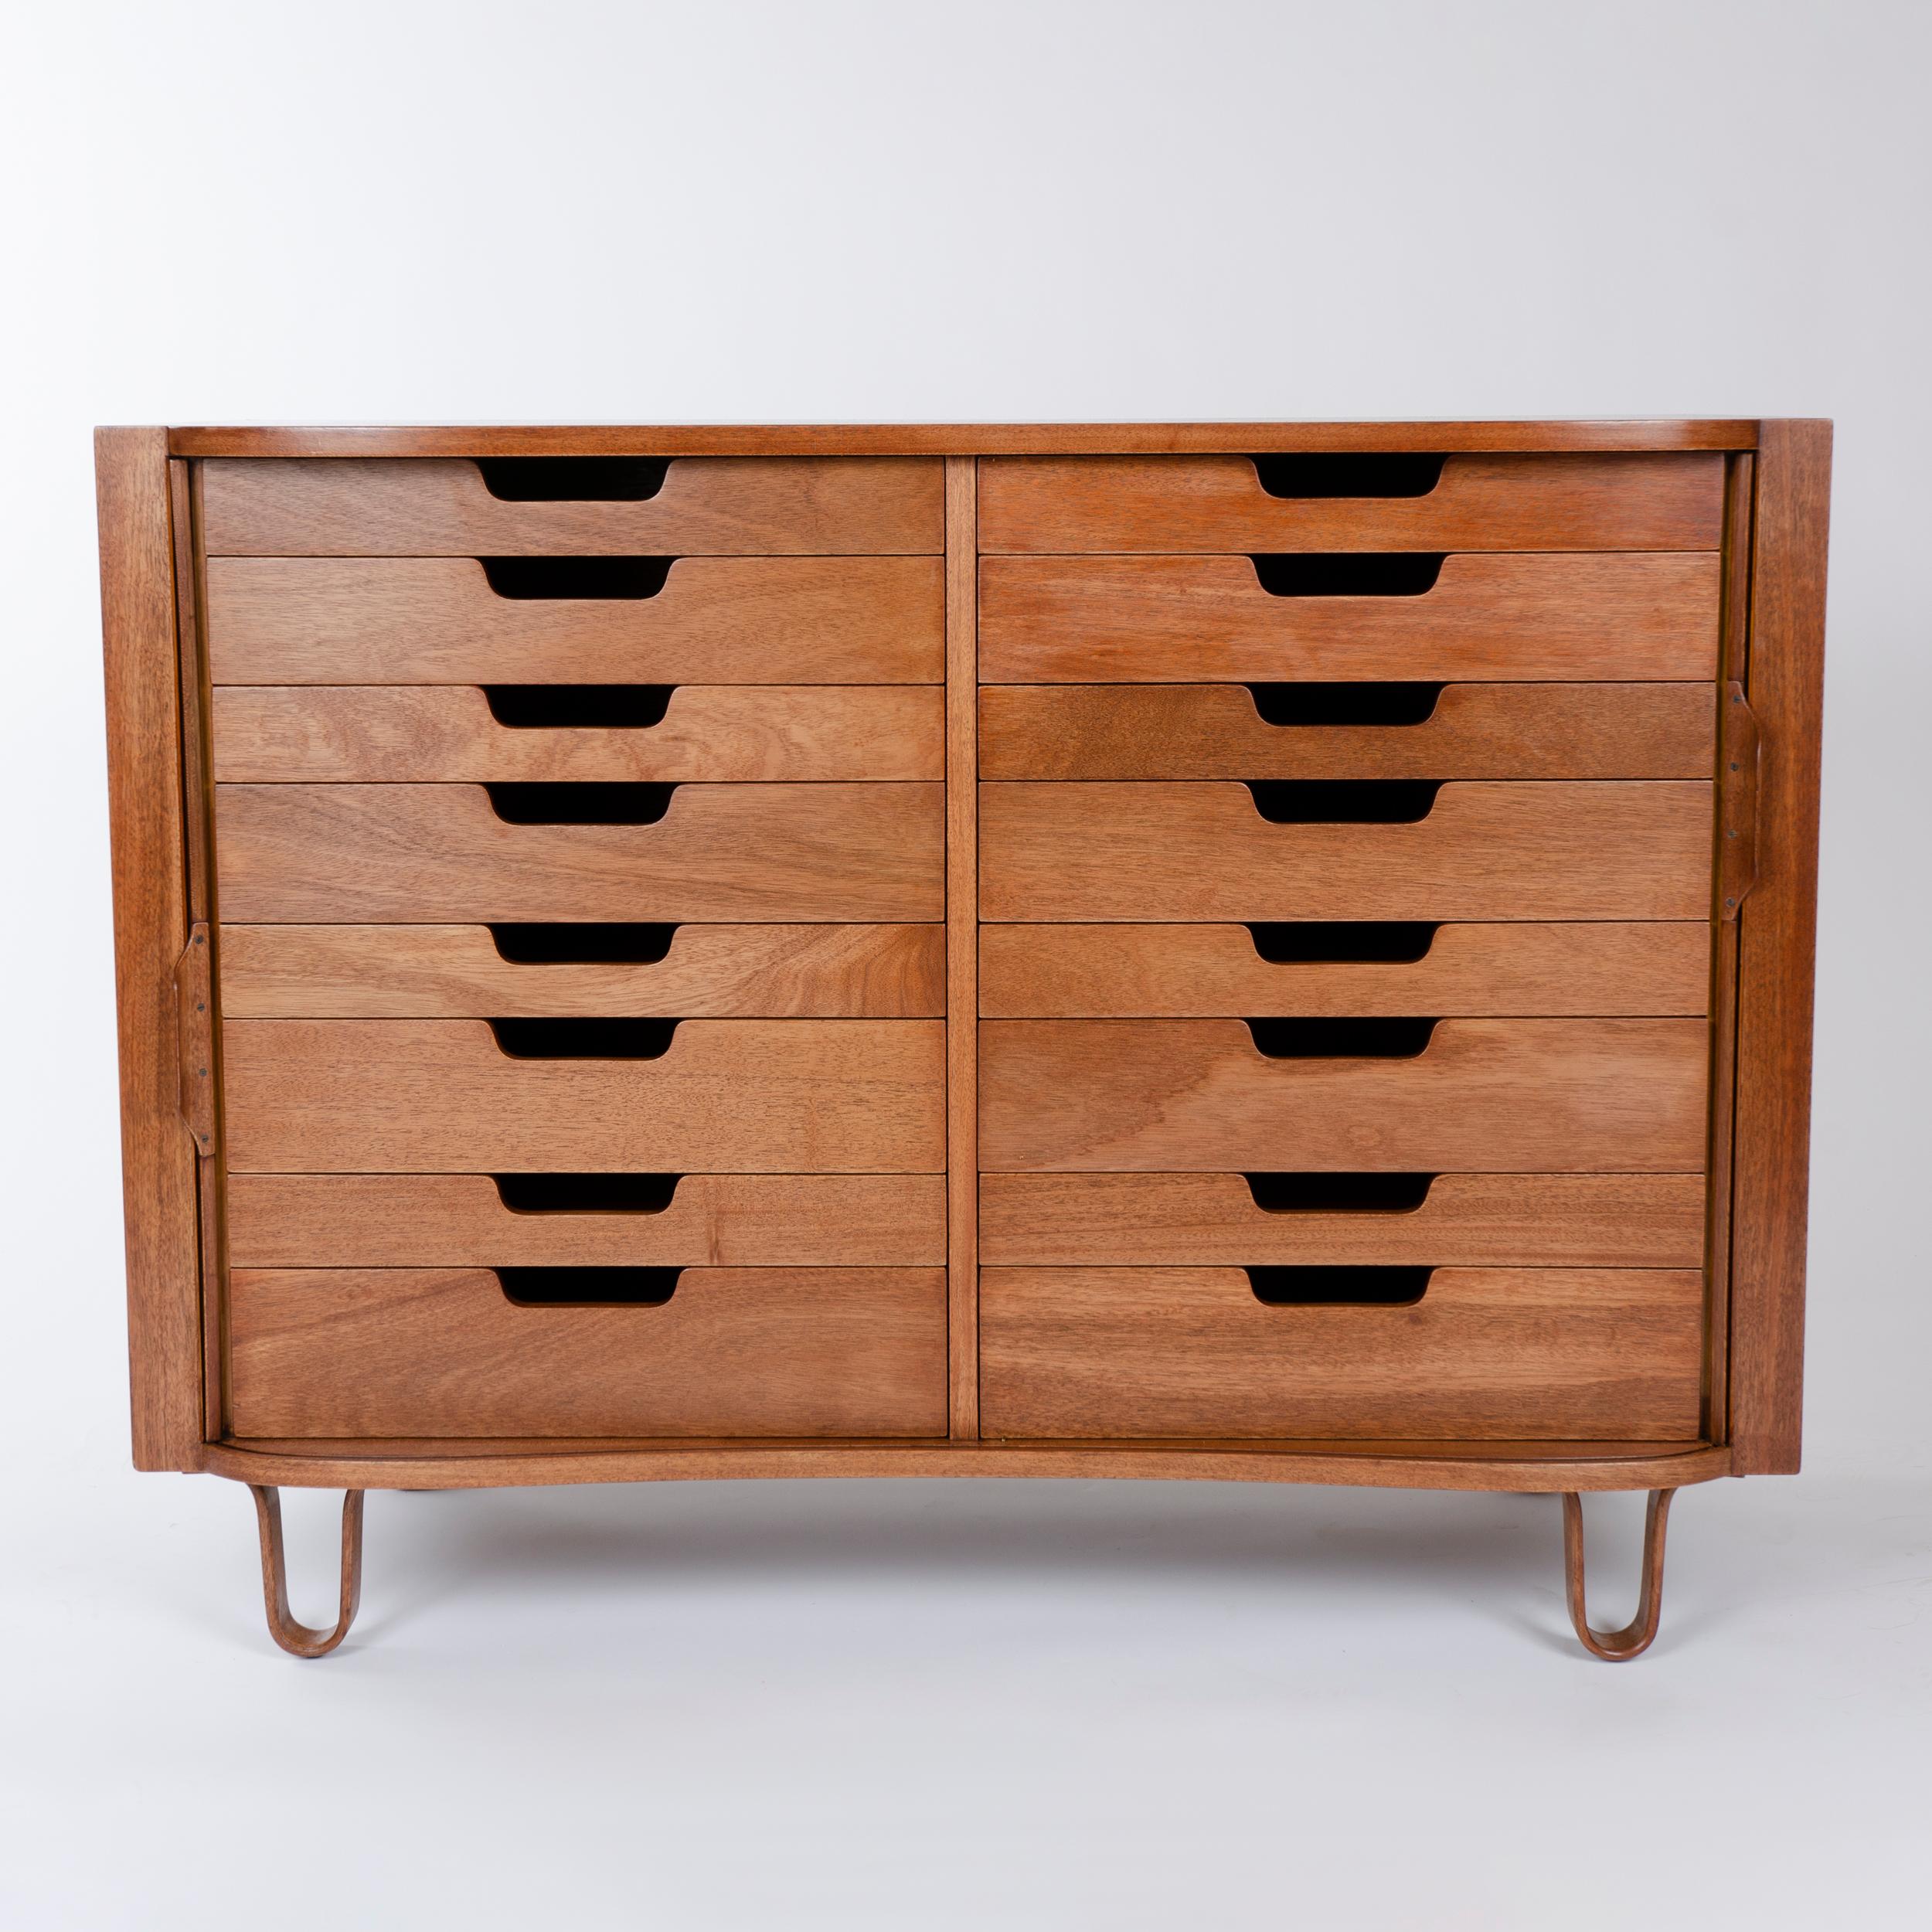 A superb mahogany tamboured mister cabinet with an undulating face, expressive hairpin legs and a useful sixteen drawer configuration.